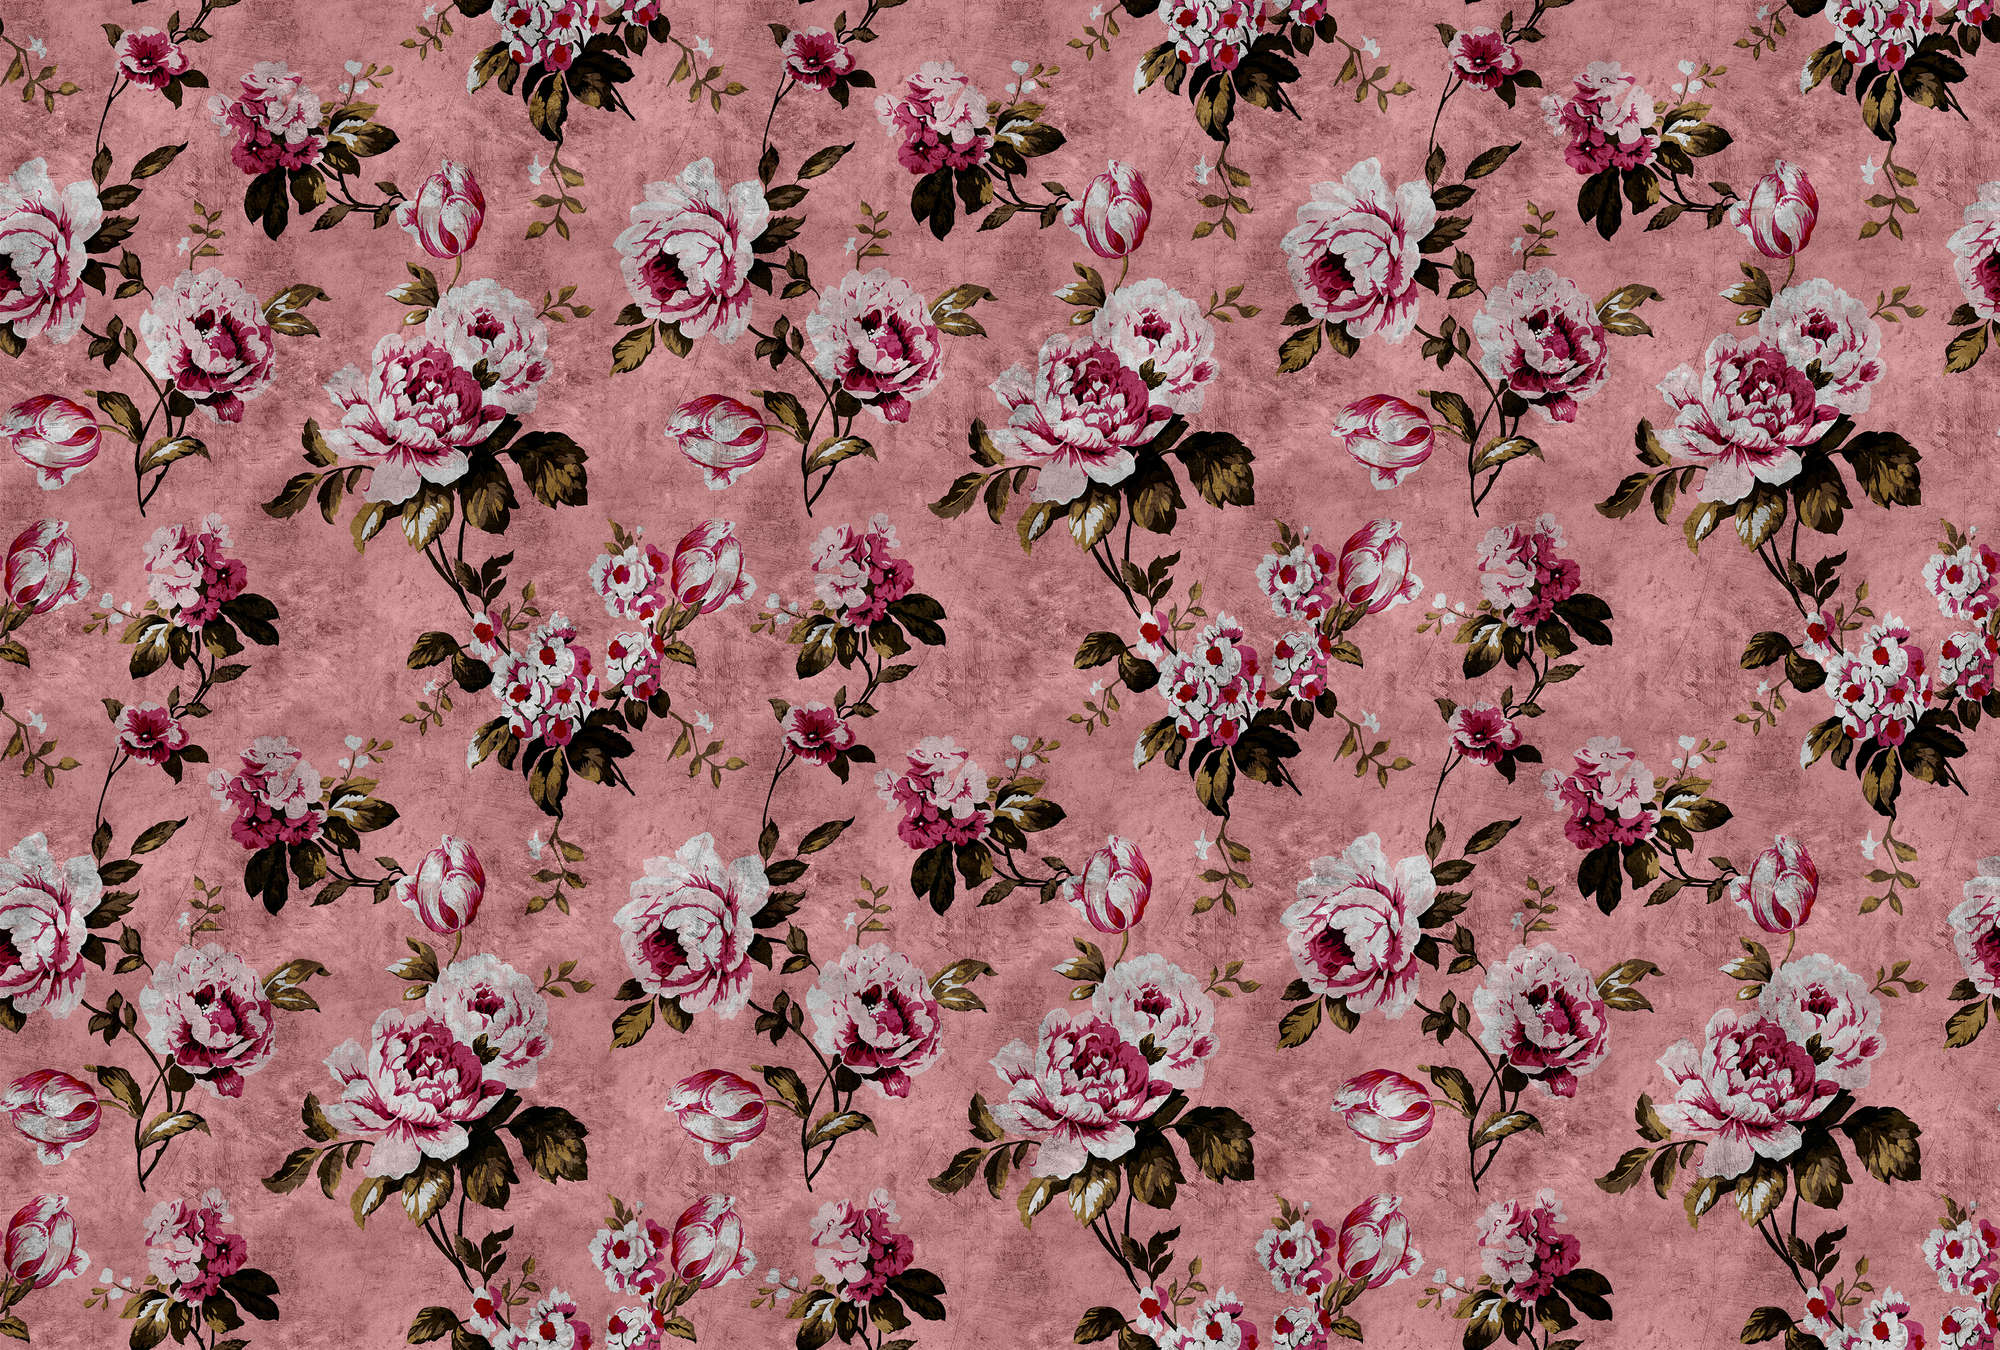             Wild roses 4 - Roses photo wallpaper in retro look, pink in scratchy structure - Pink, Red | Pearl smooth non-woven
        